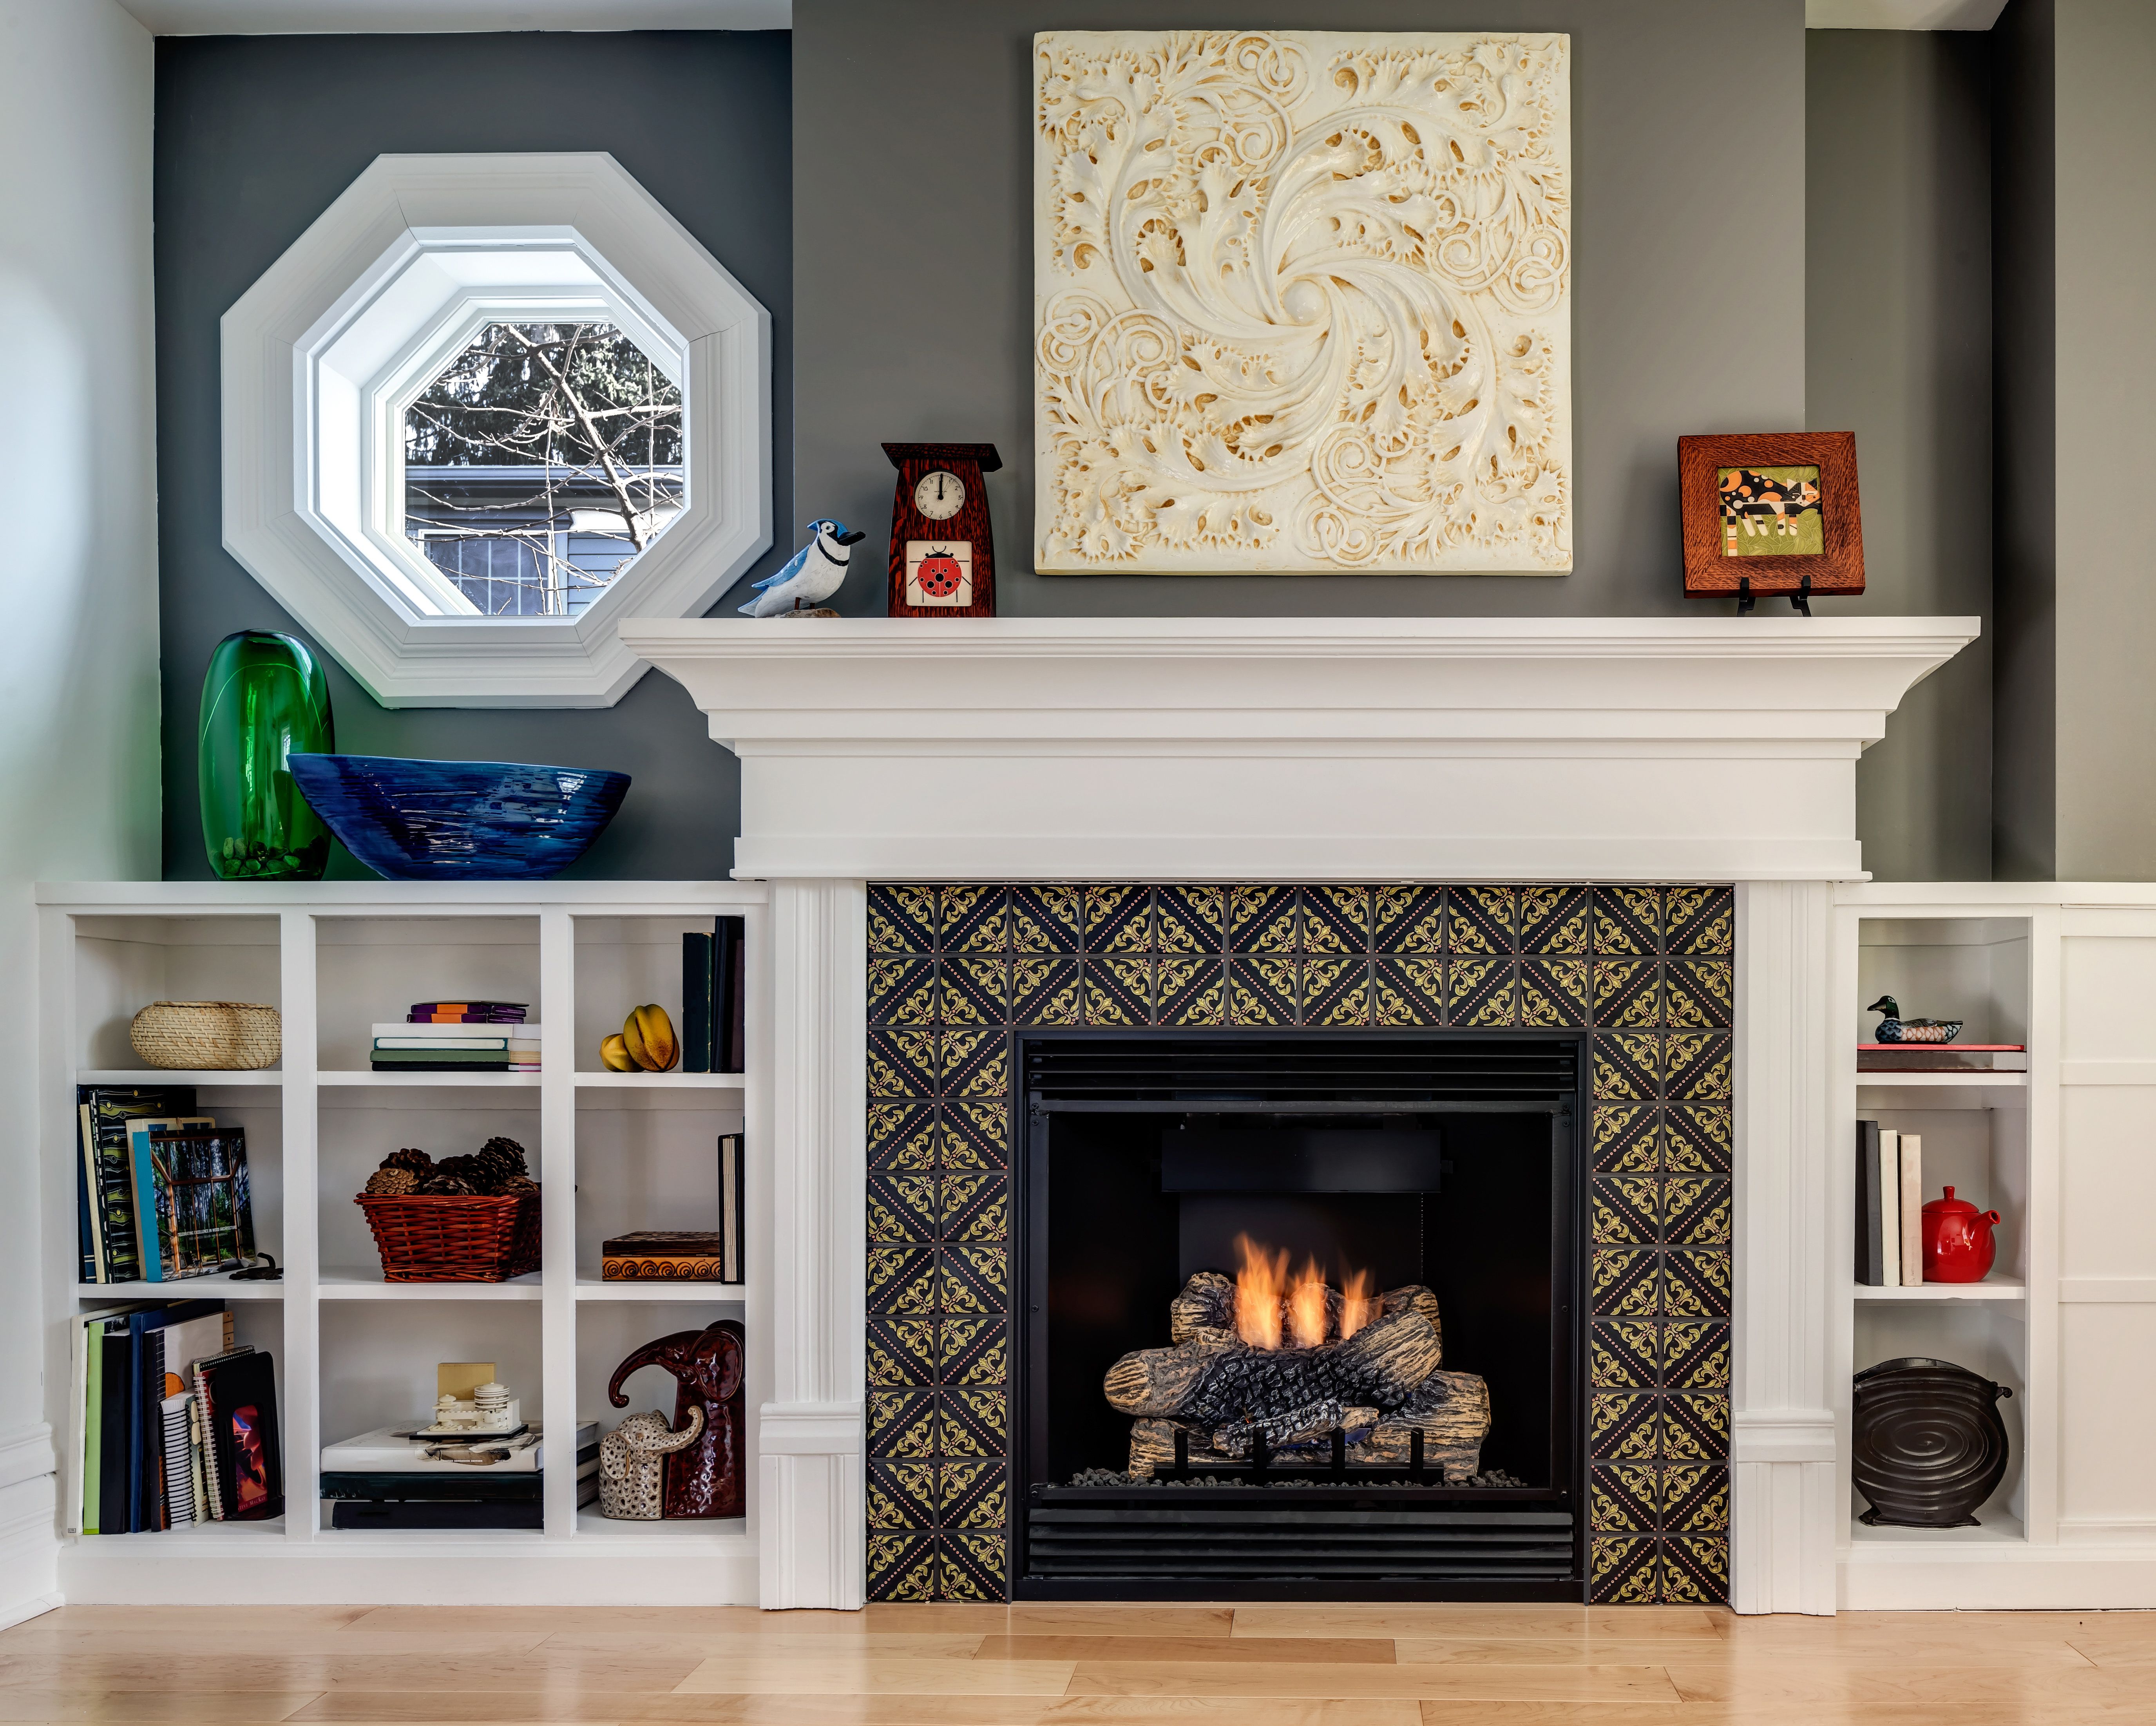 Gas Fireplace Sizes Unique This Small but Stylish Fireplace Features Our Lisbon Tile